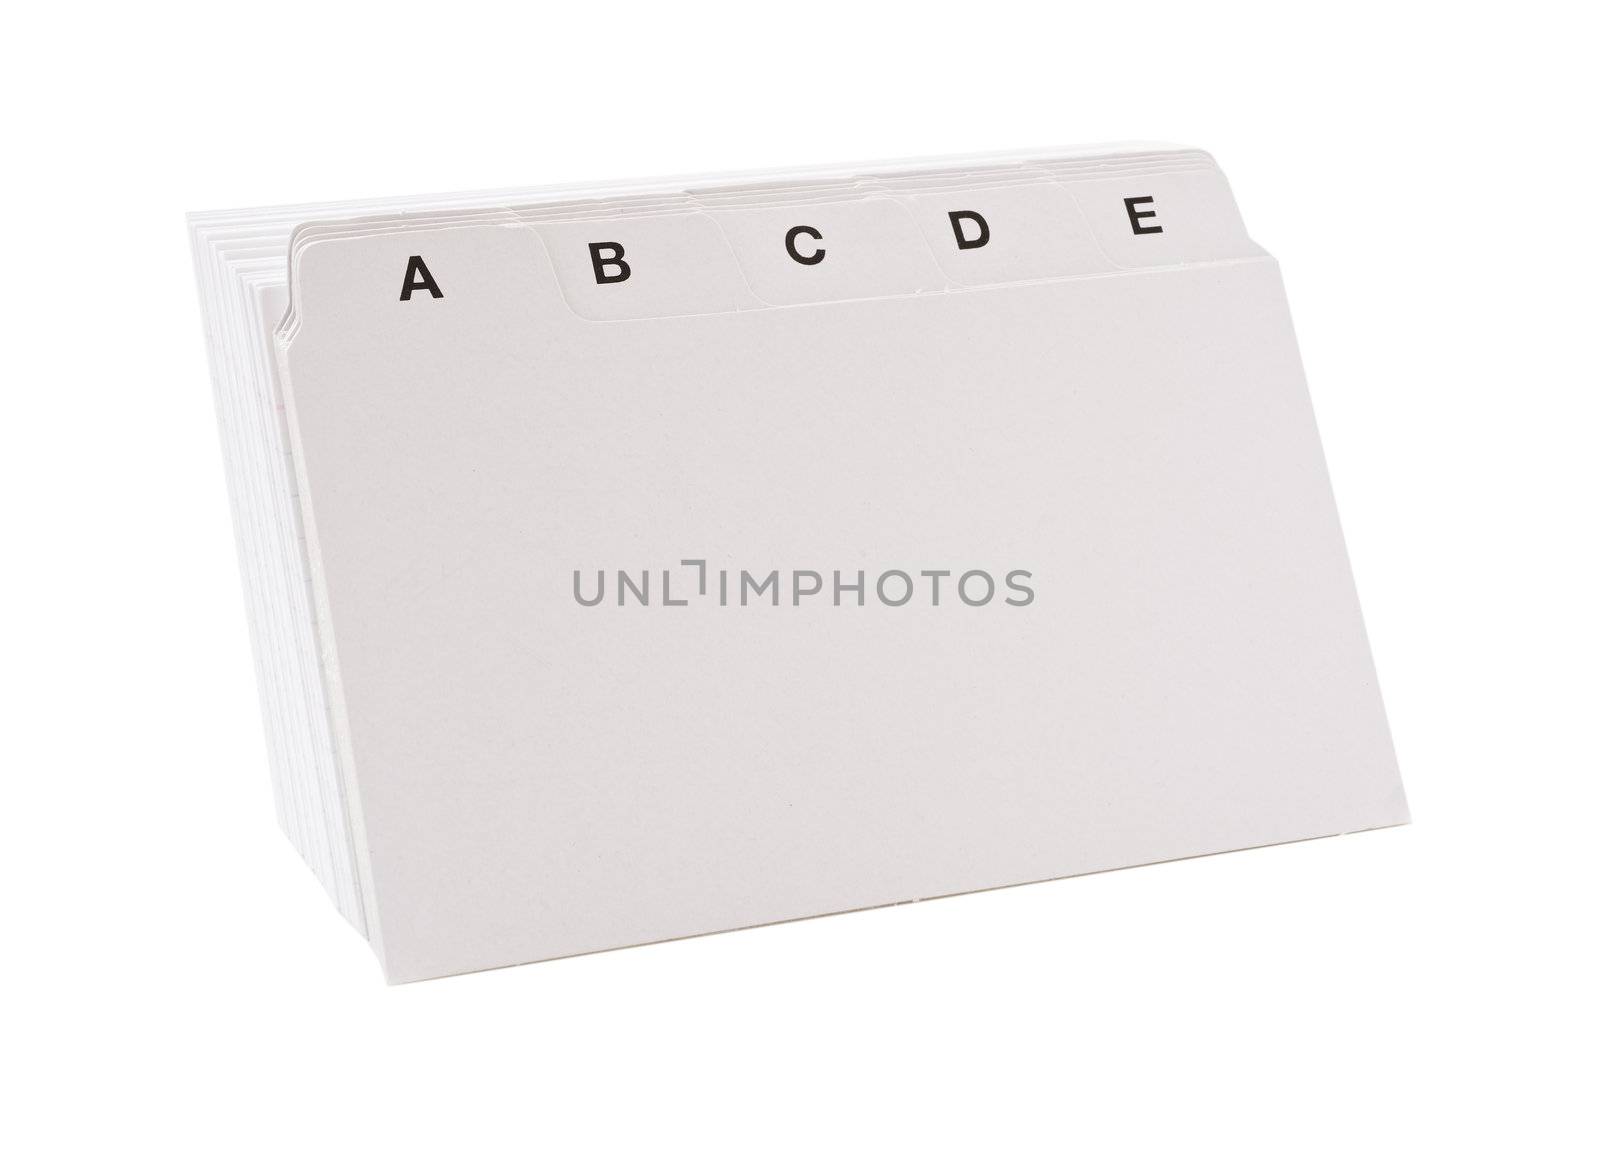 Blank white cards in alfabetic order